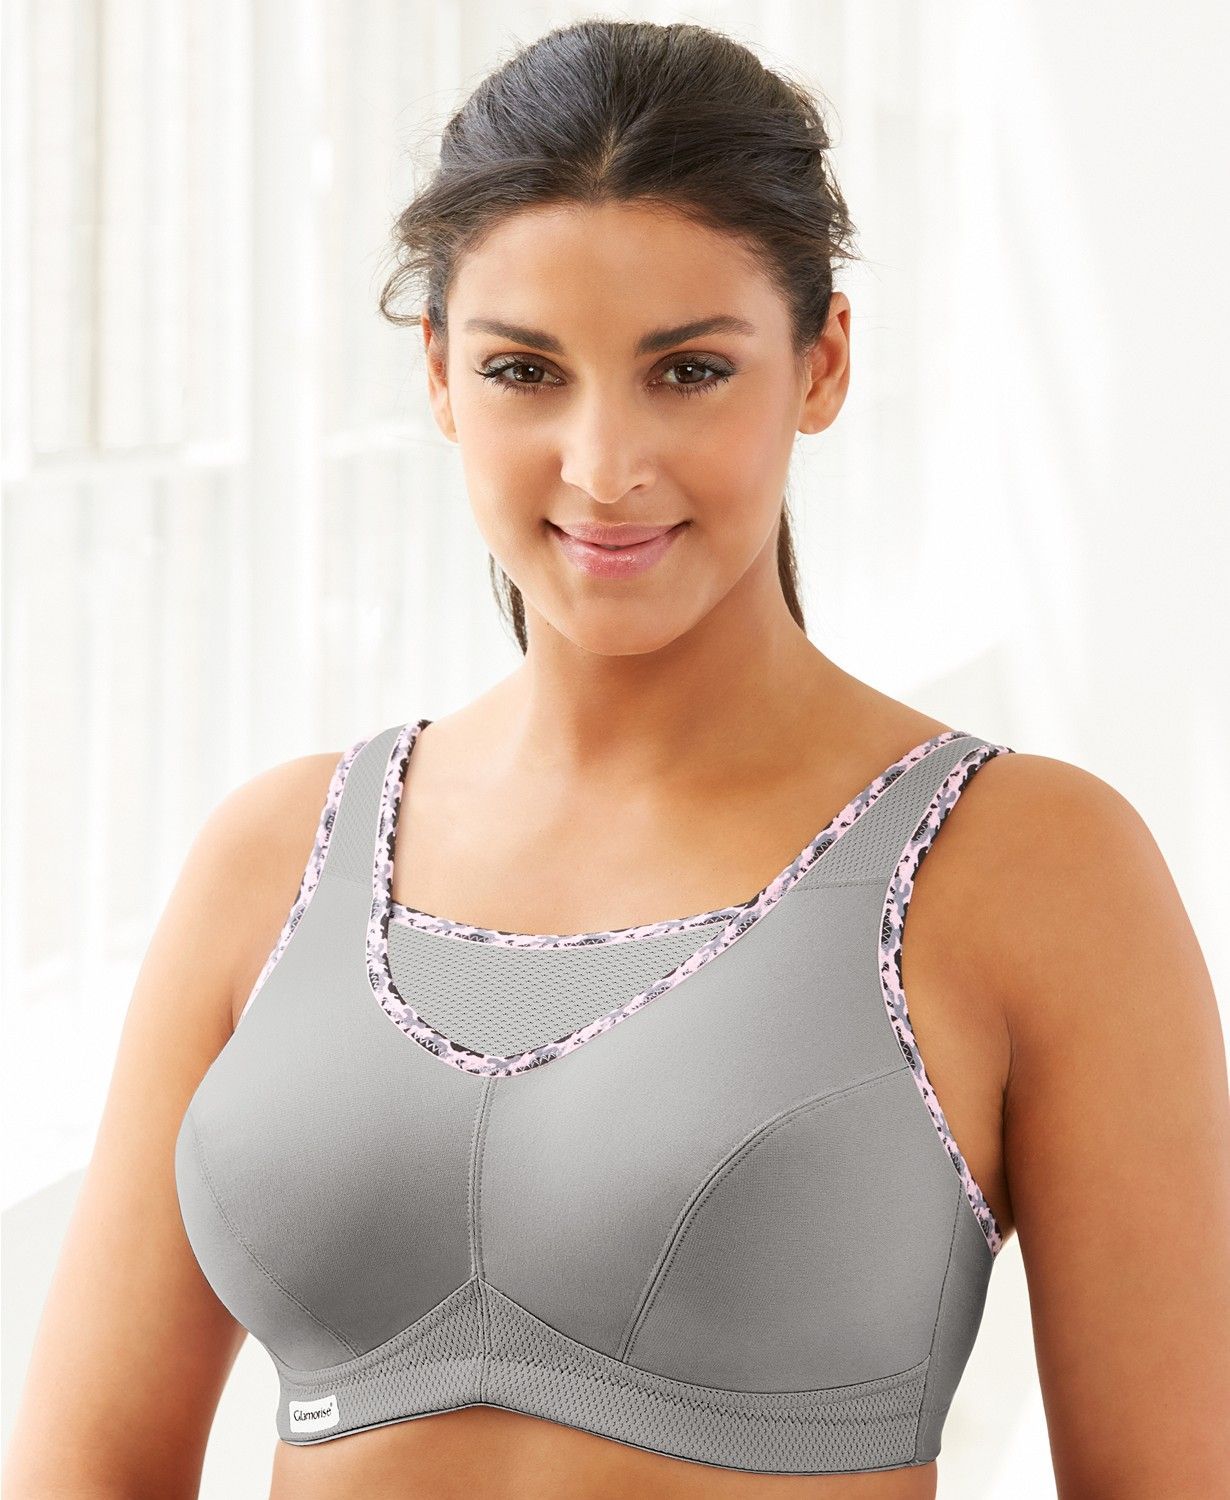 is underwired bra better for large breasts